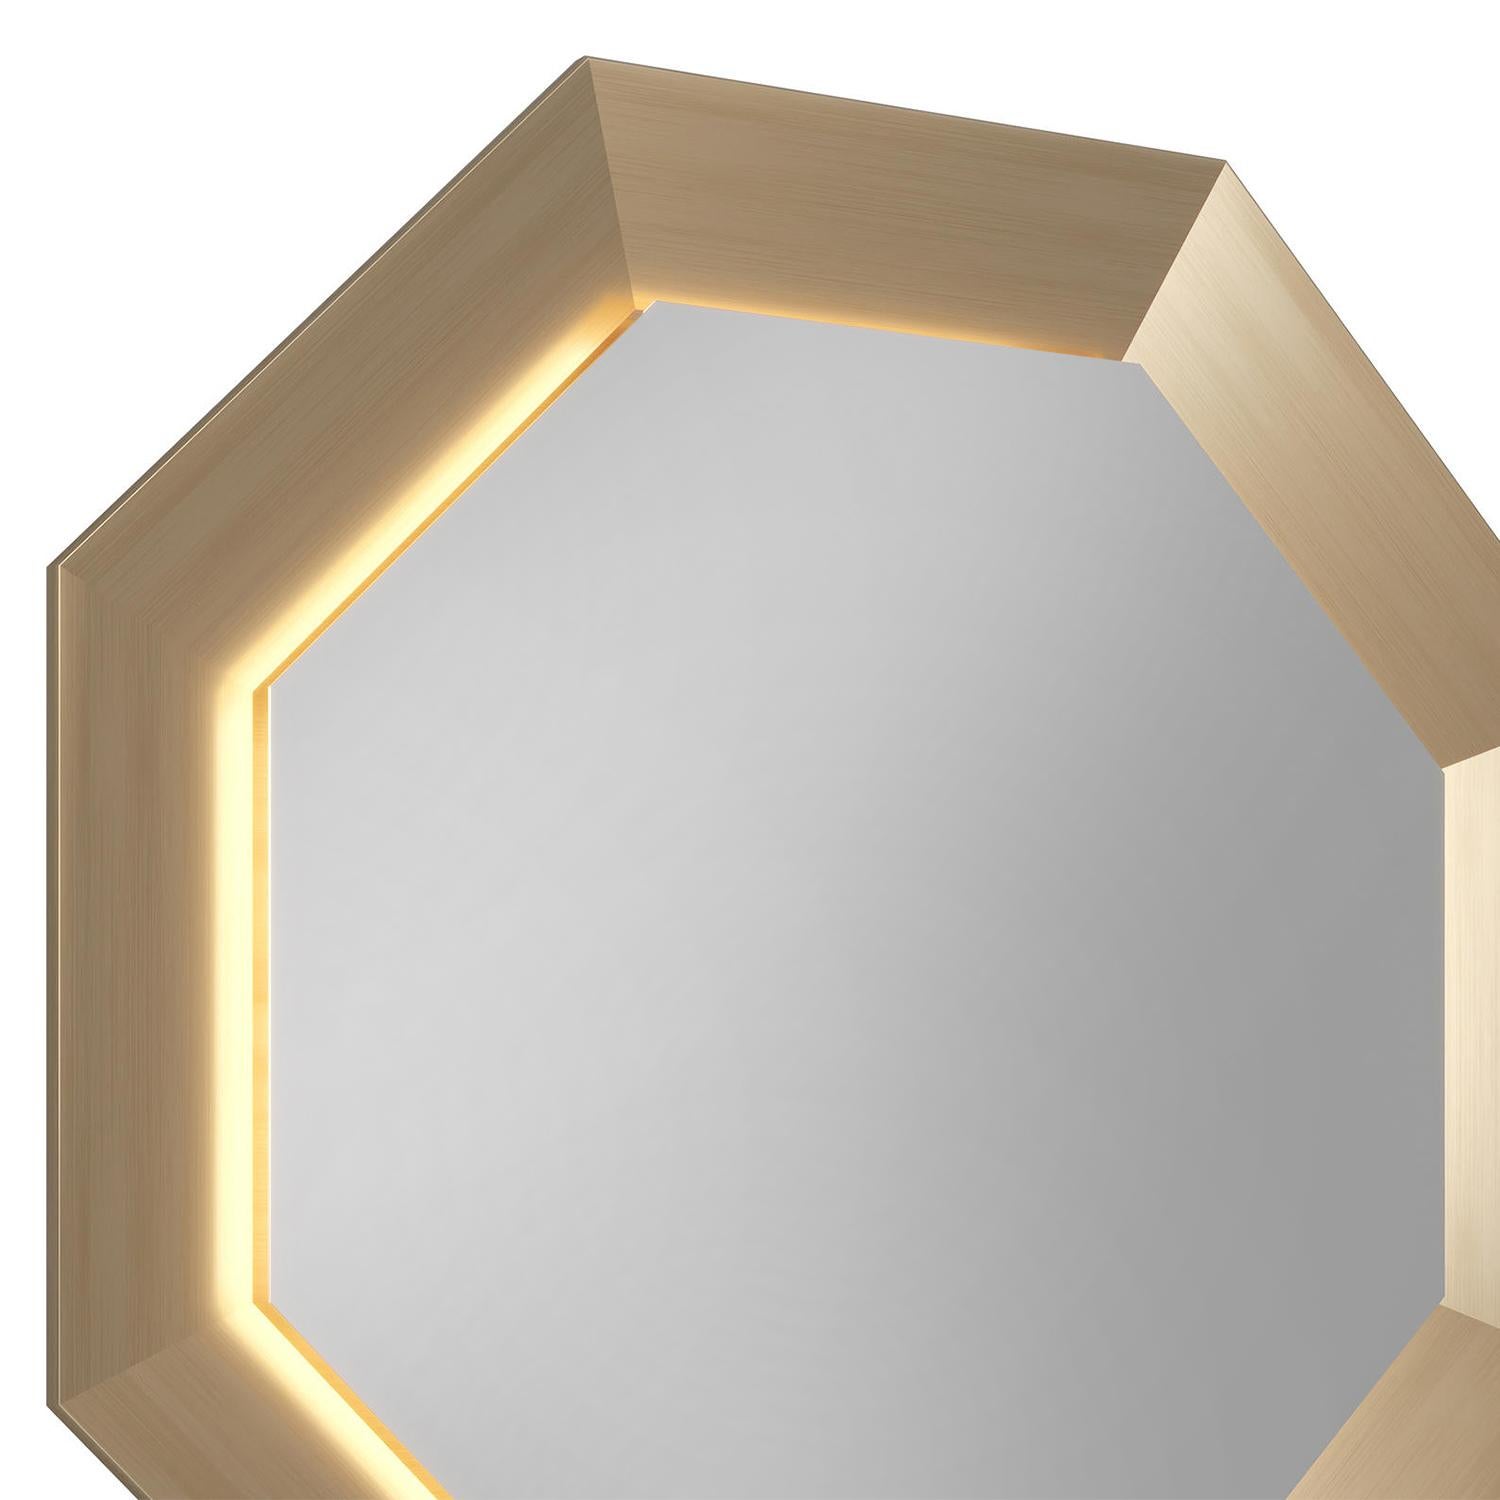 Mirror Hocto gold Matte with metal frame in gold brushed matte
finish and with hoctagonal mirror glass with led backlight system.